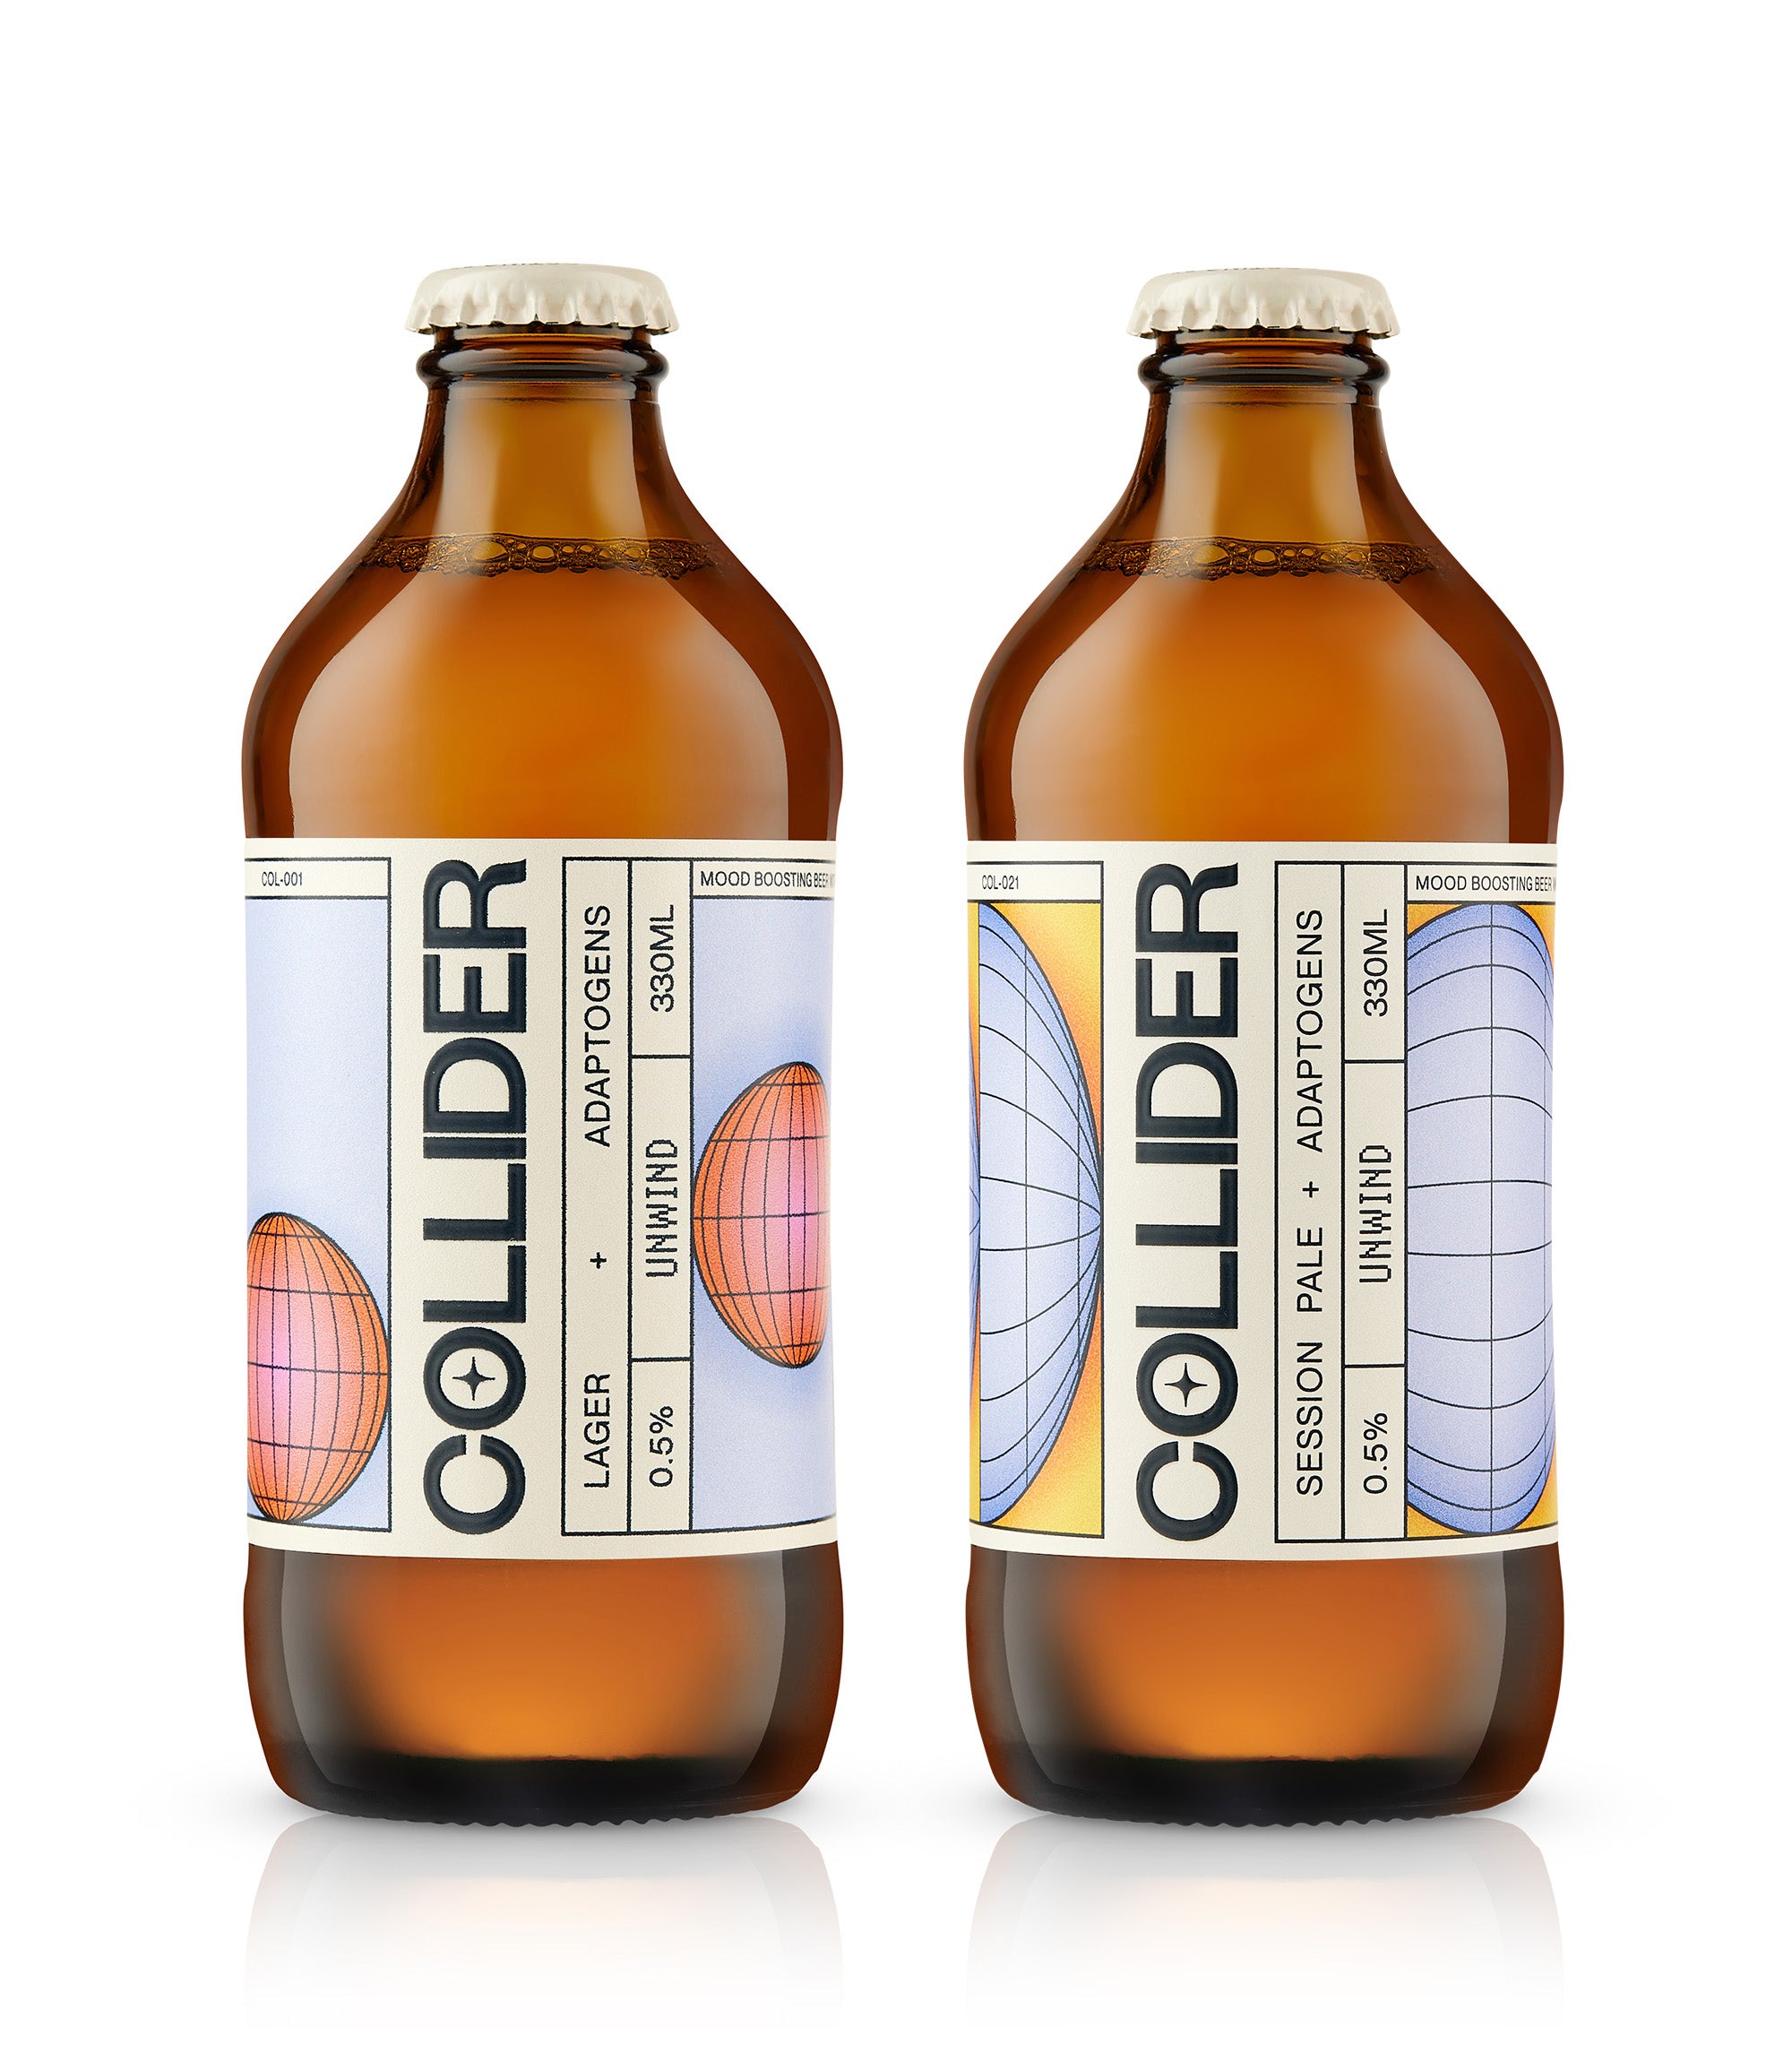 Mood boosting alcohol free lager and pale ale in bottles infused with adaptogens and fungi.